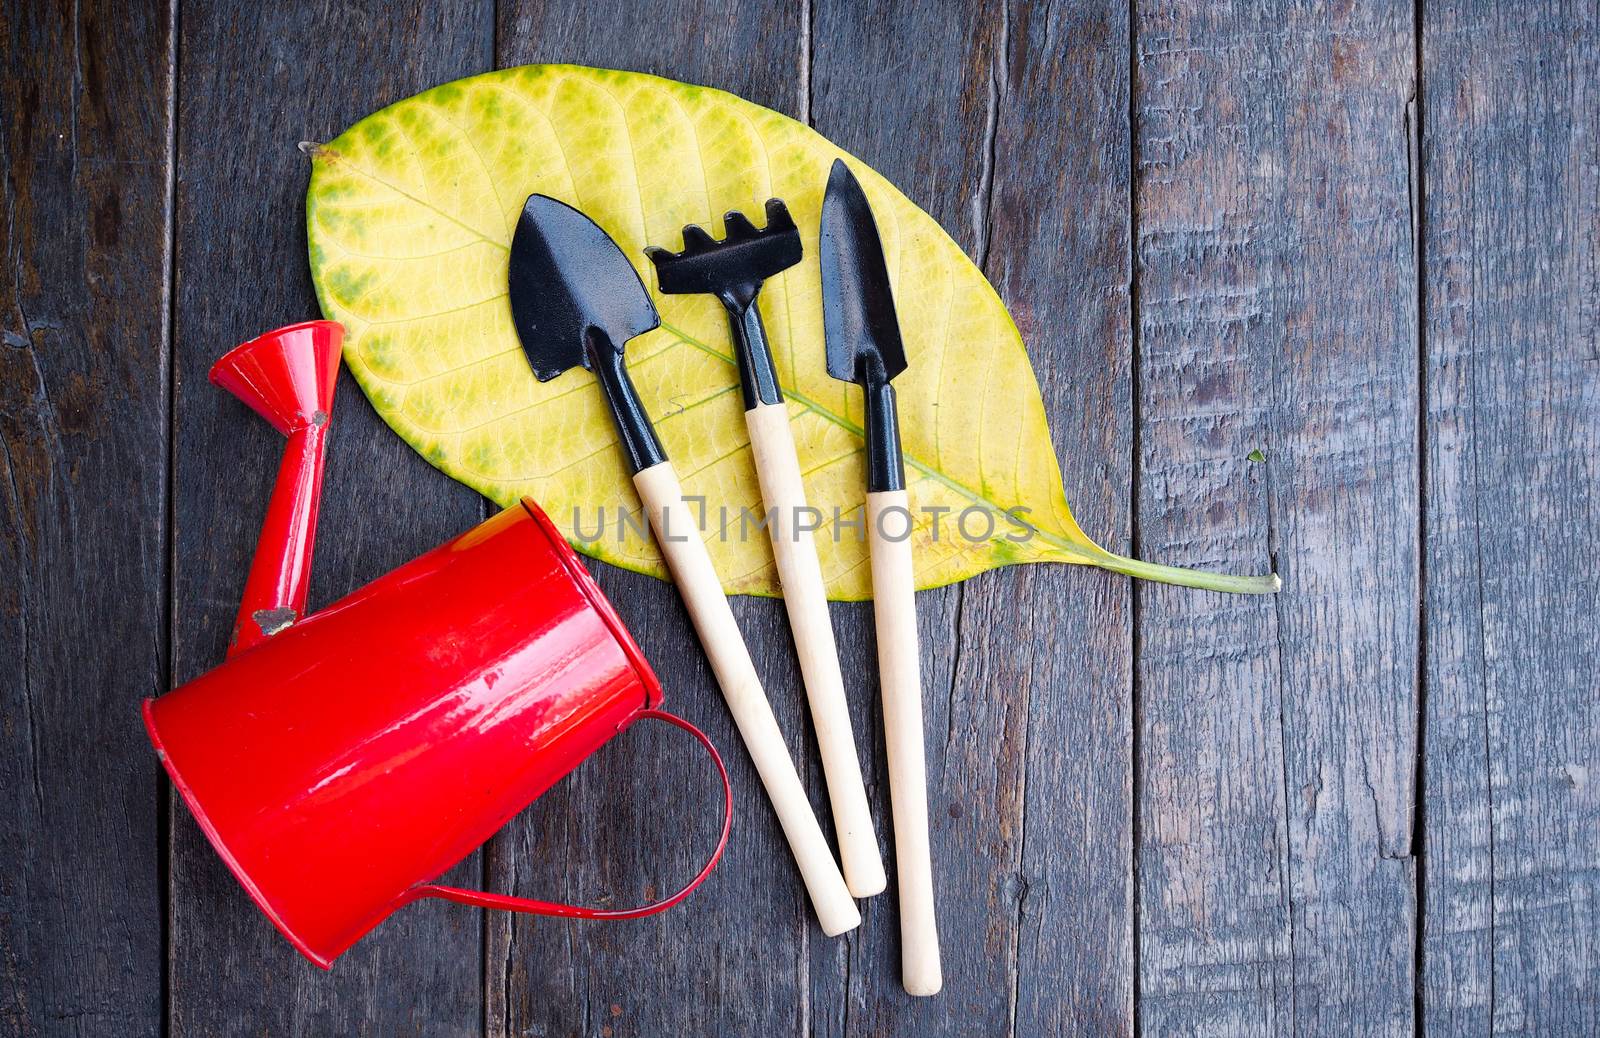 Red watering can And gardening equipment tool for planting trees by kittima05